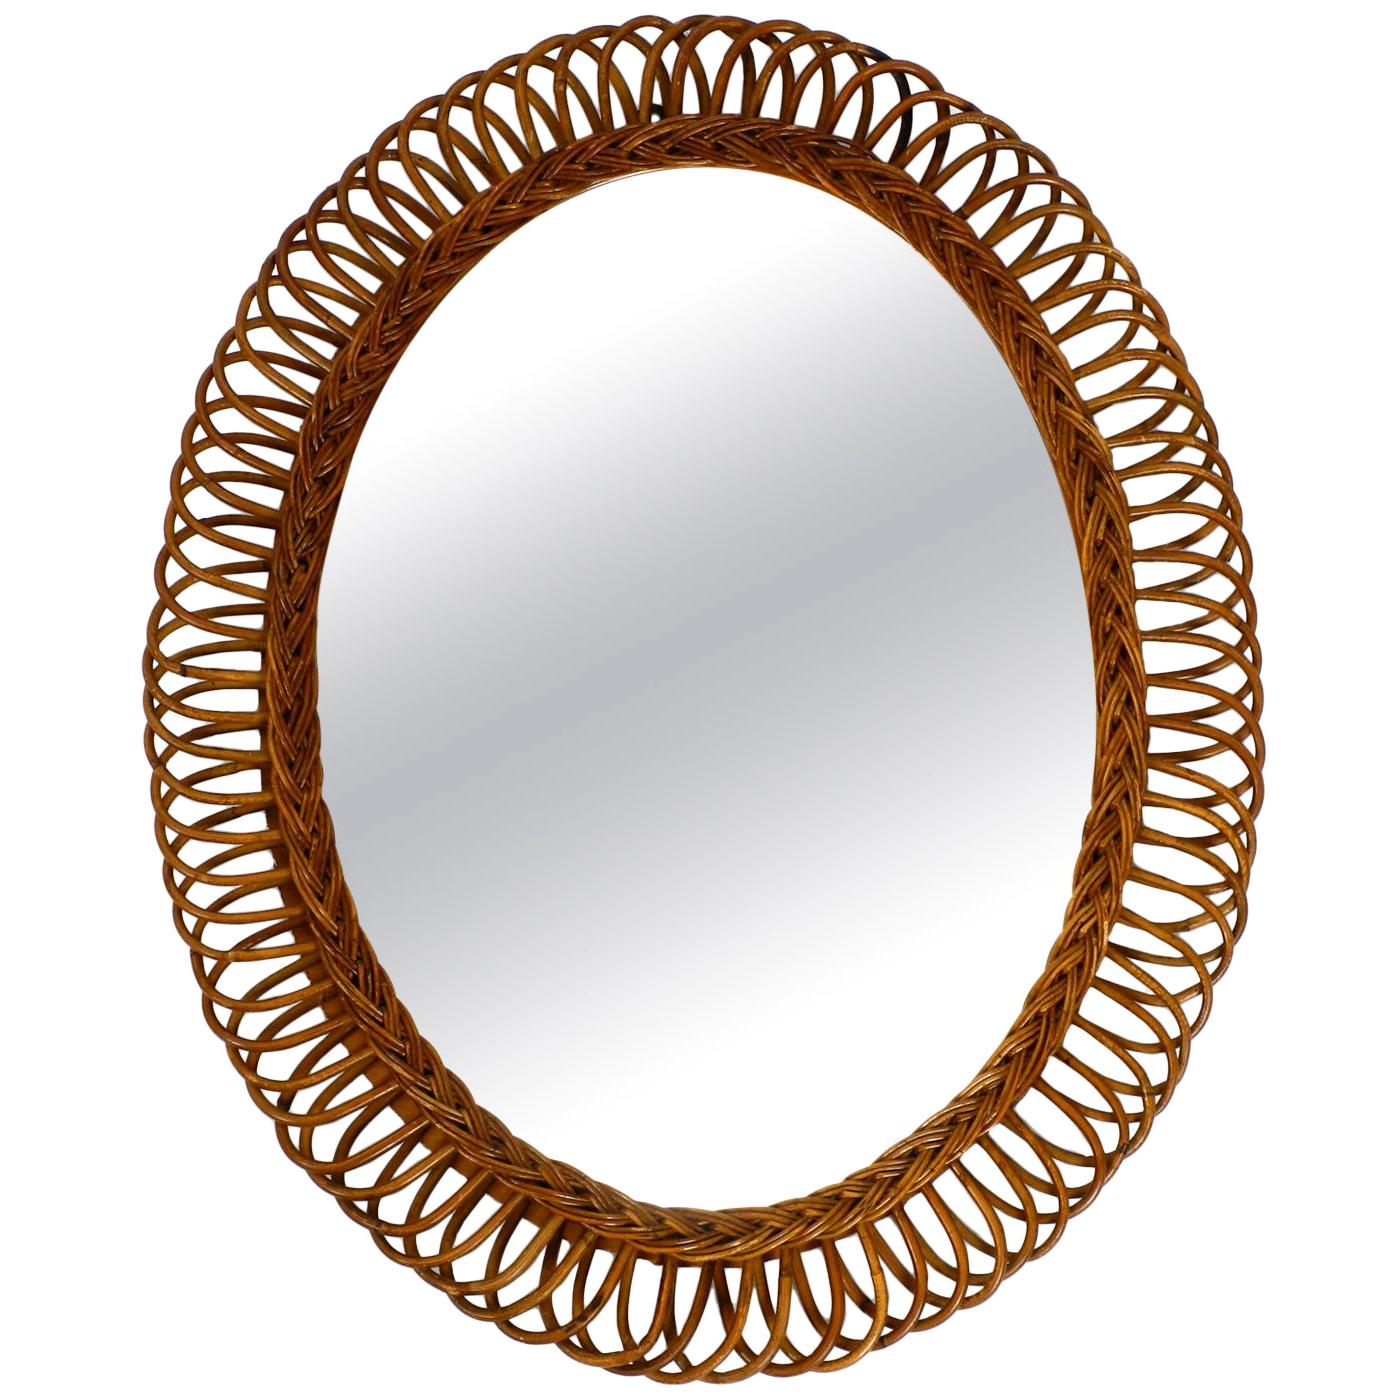 1960s Italian Large Oval Wall Mirror Made of Bamboo or Rattan in Loop Design